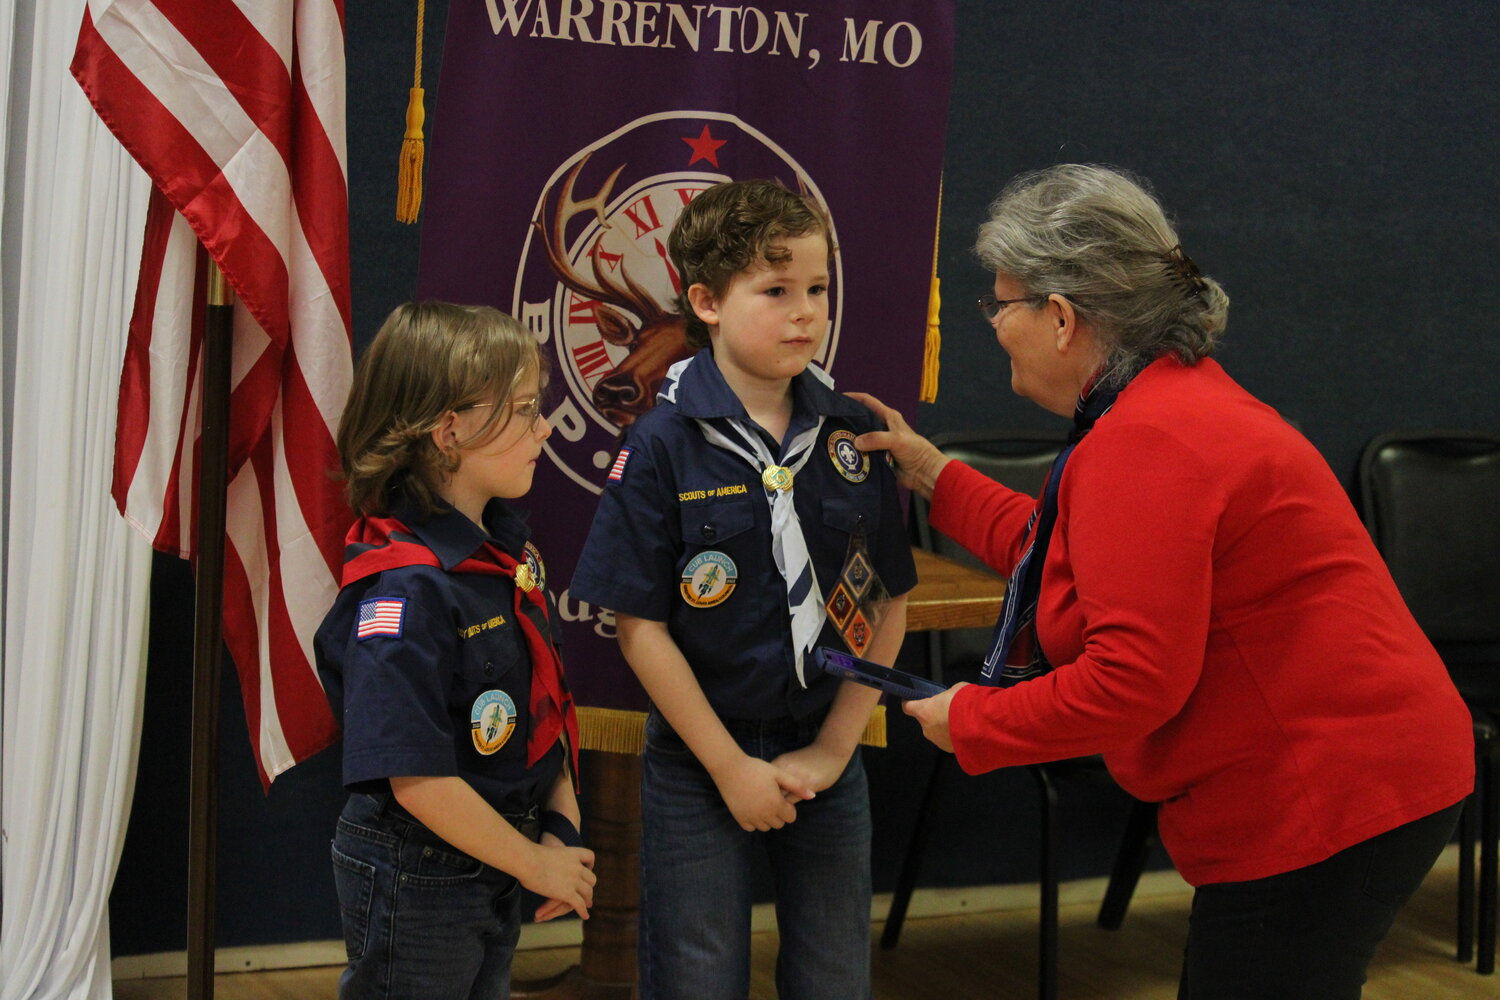 Cub Scouts gather at the end of the ceremony for a picture.